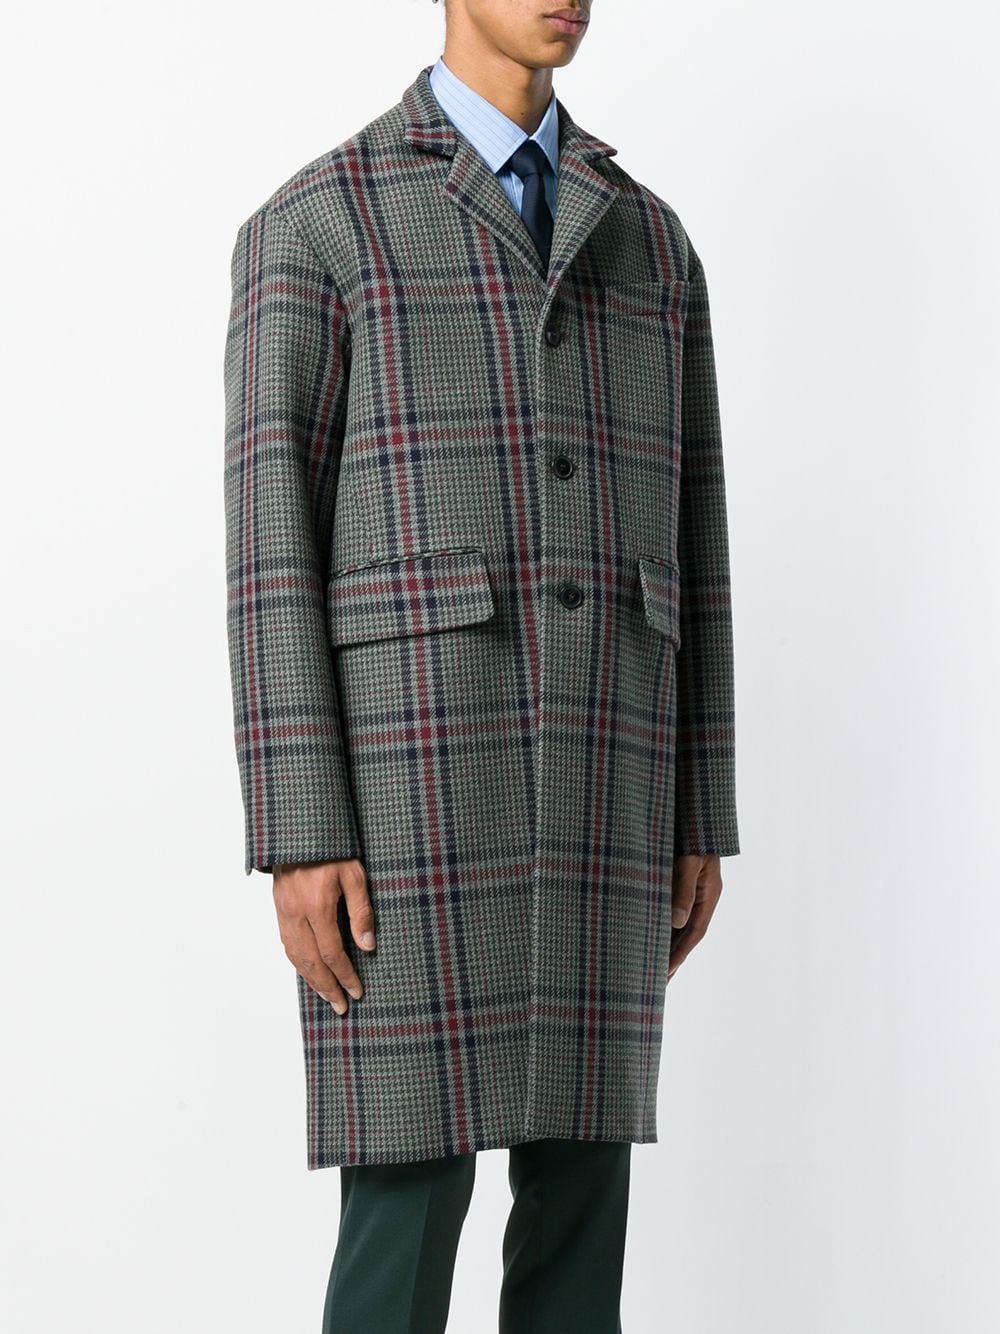 Valentino Houndstooth Single Breasted Coat - Farfetch